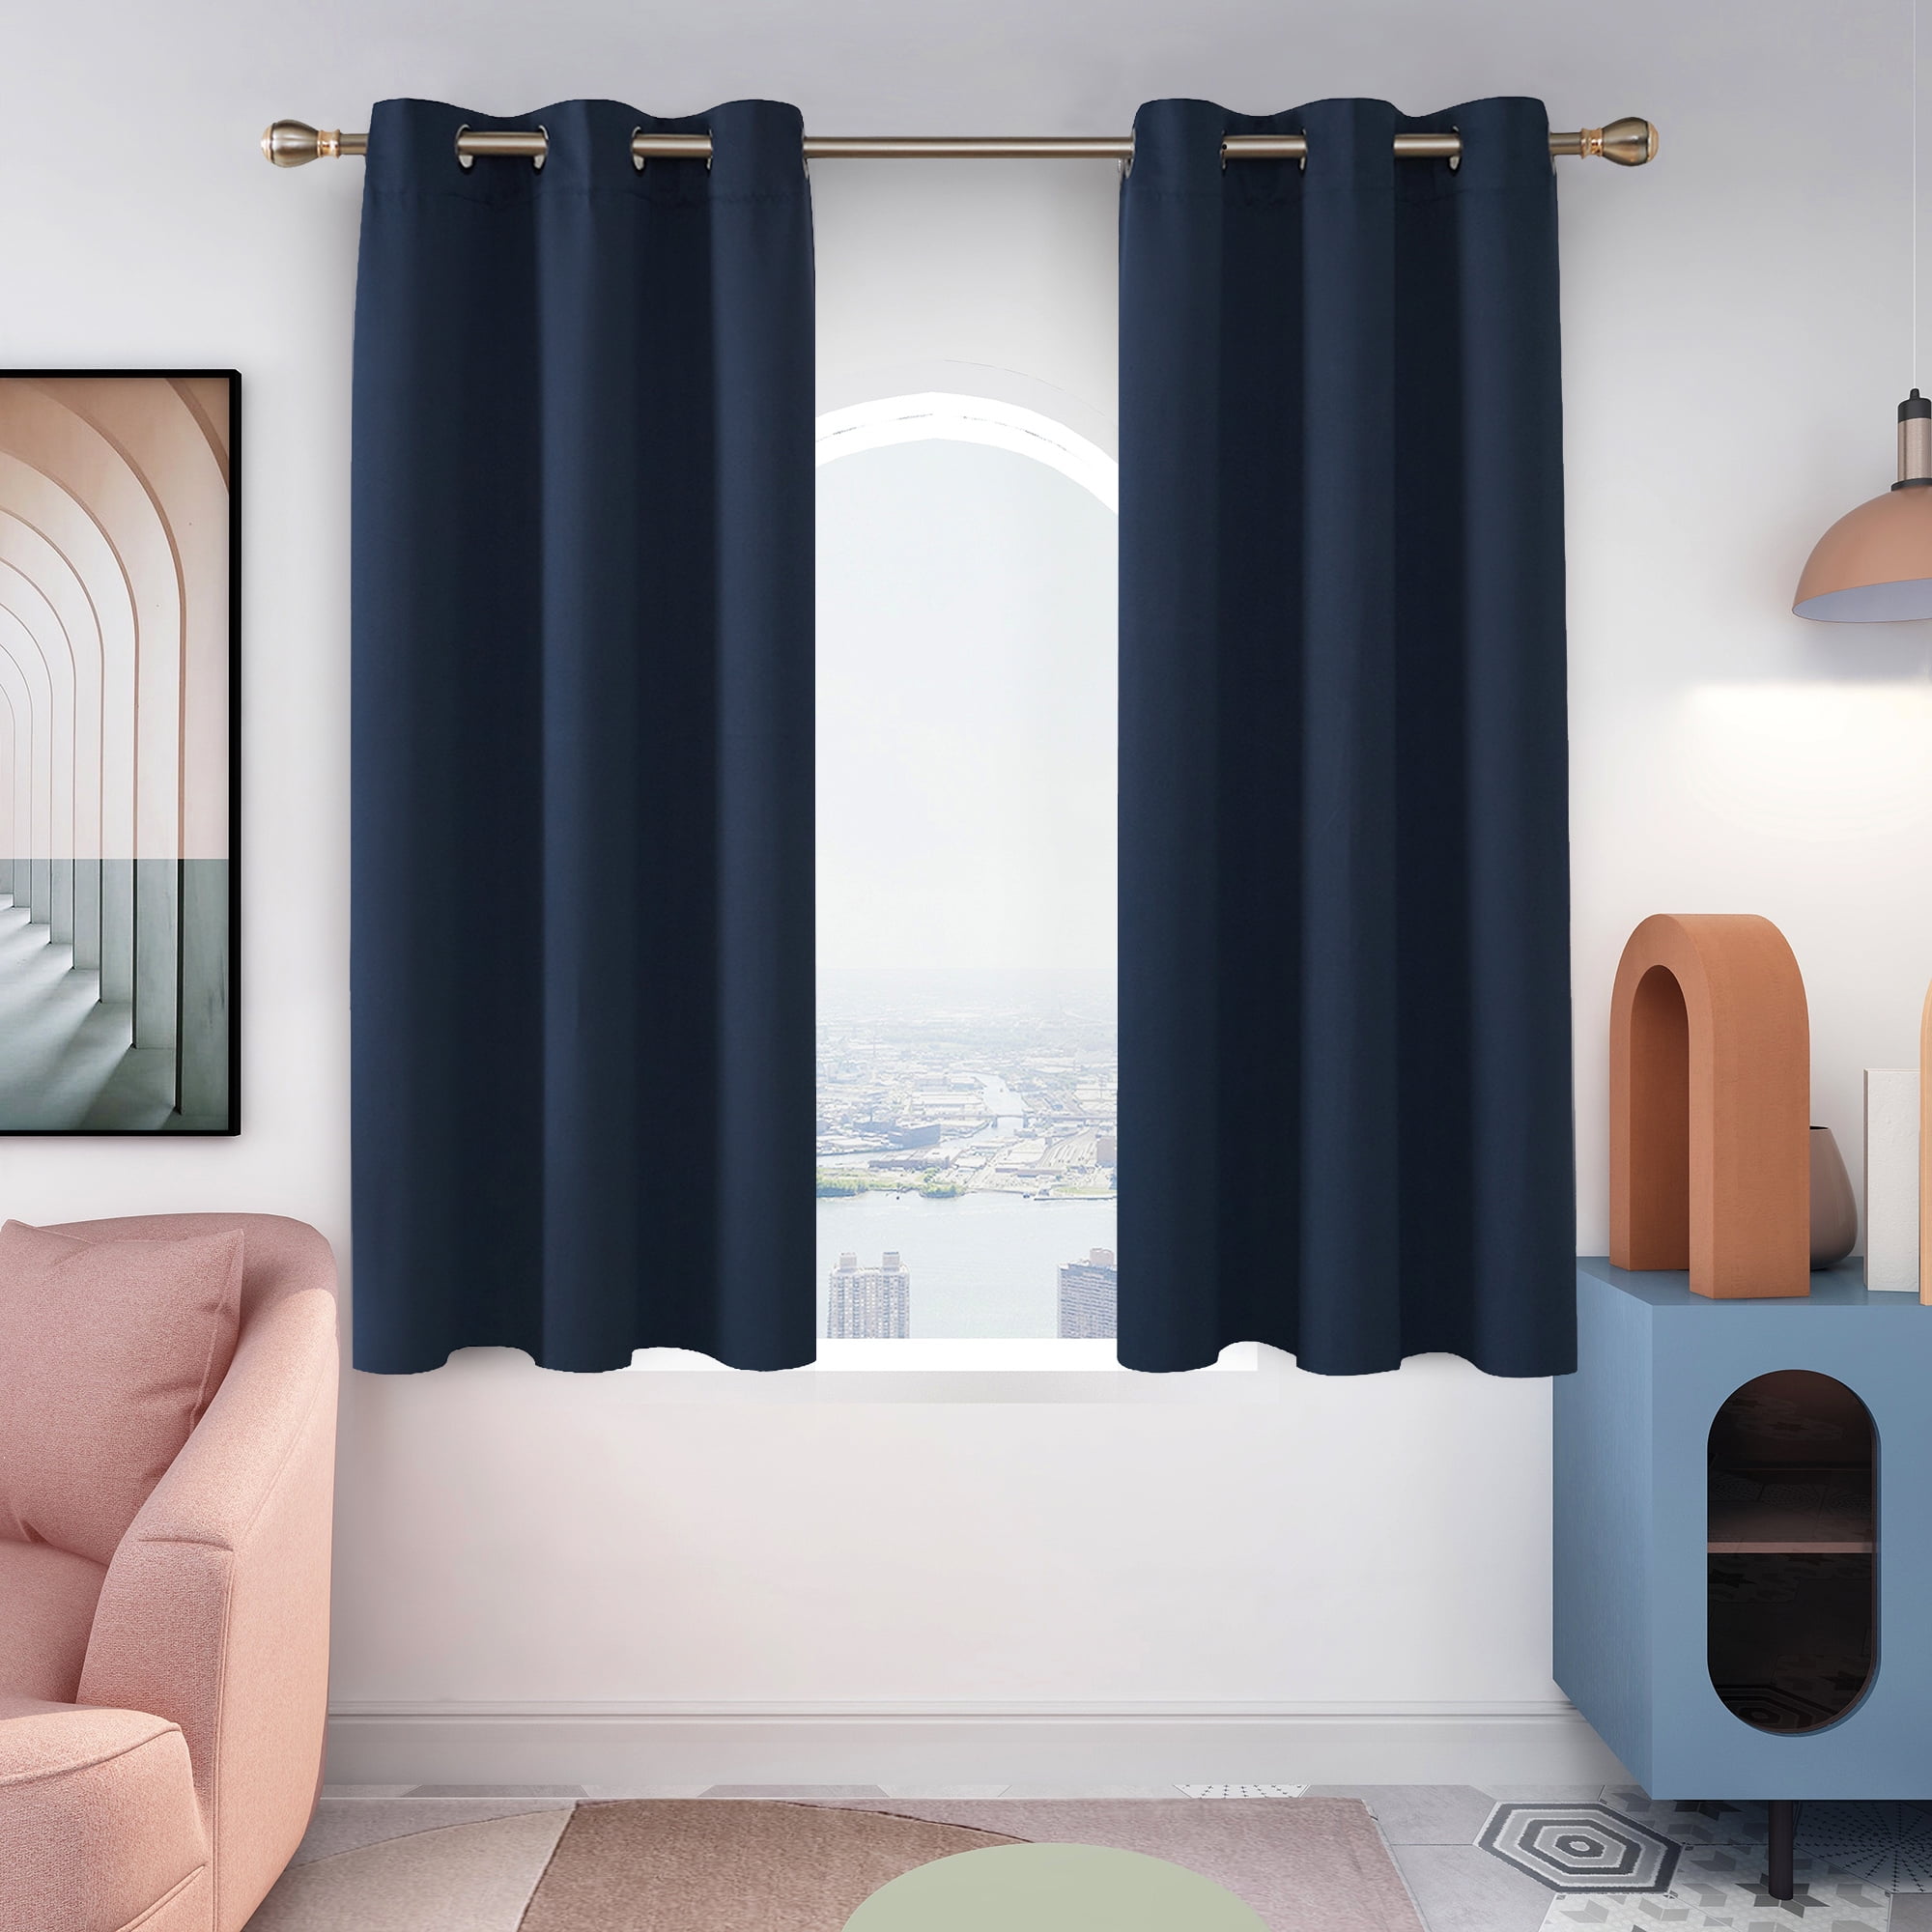 Blackout Curtains 2 Panels for Room Darkening Thermal Insulated Window Navy Blue 